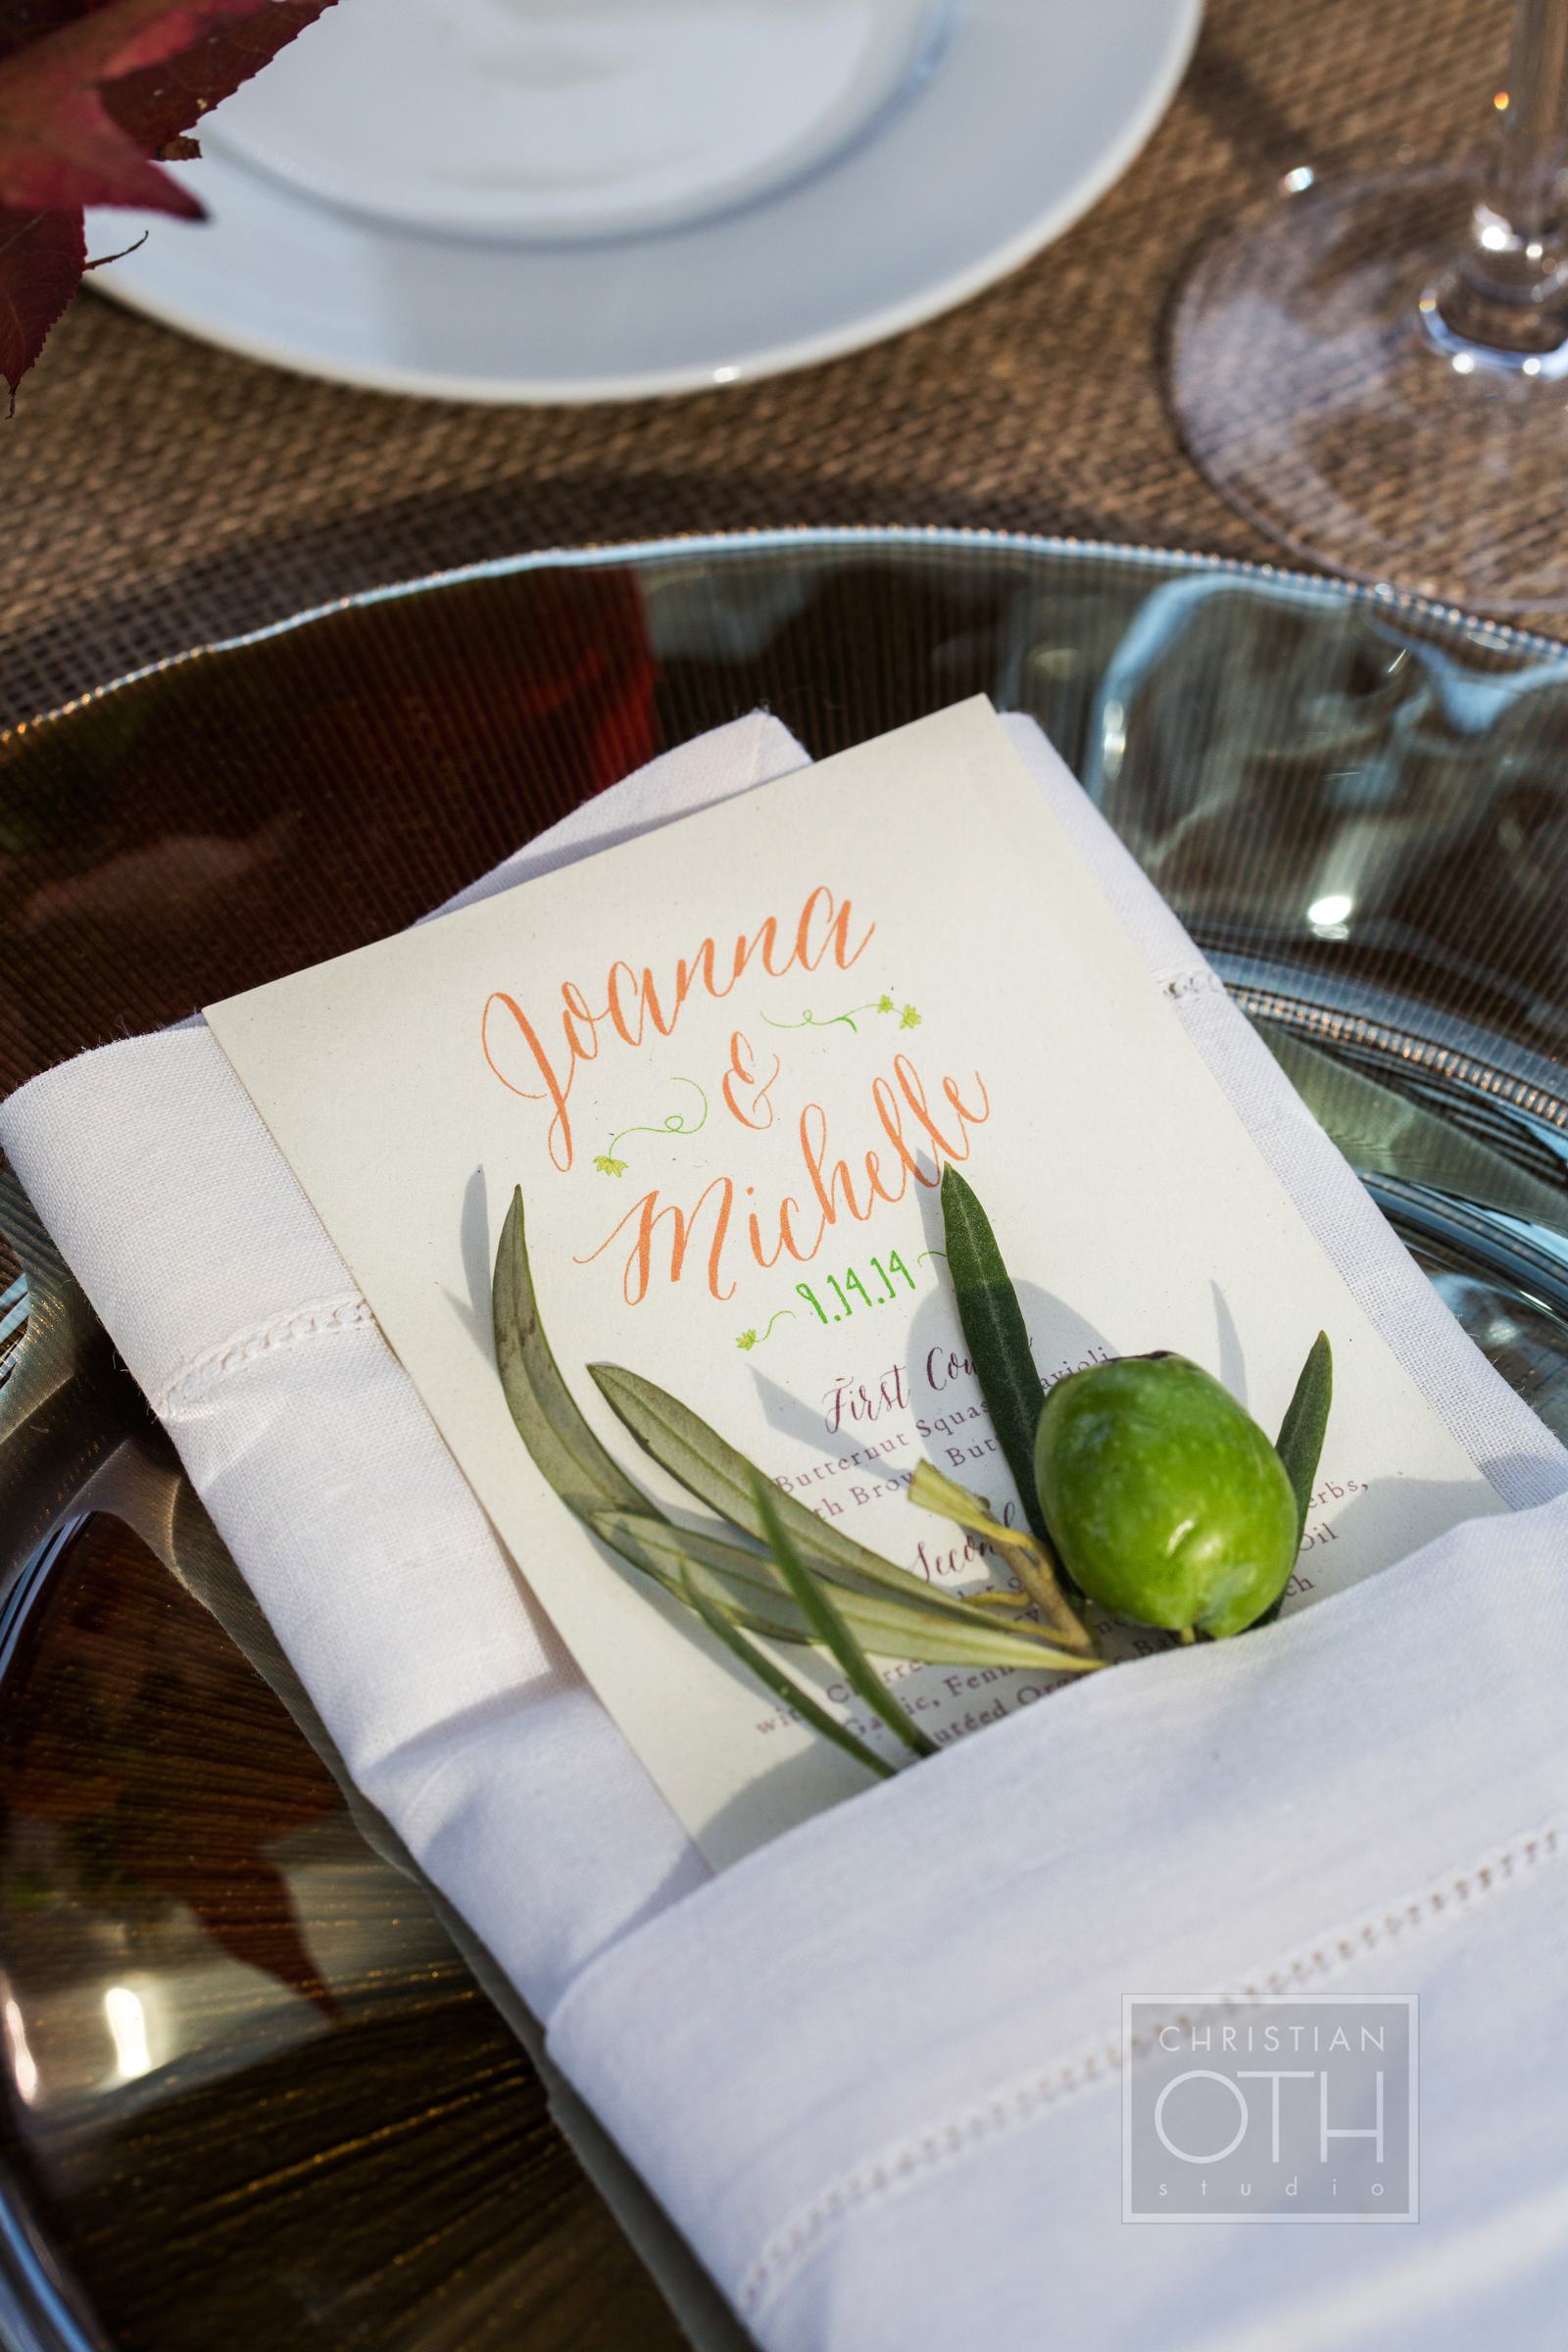  Other day of pieces include a menu cut to fit inside a folded napkin and simple flat place cards which were pinned to olive branches for display.&nbsp; 